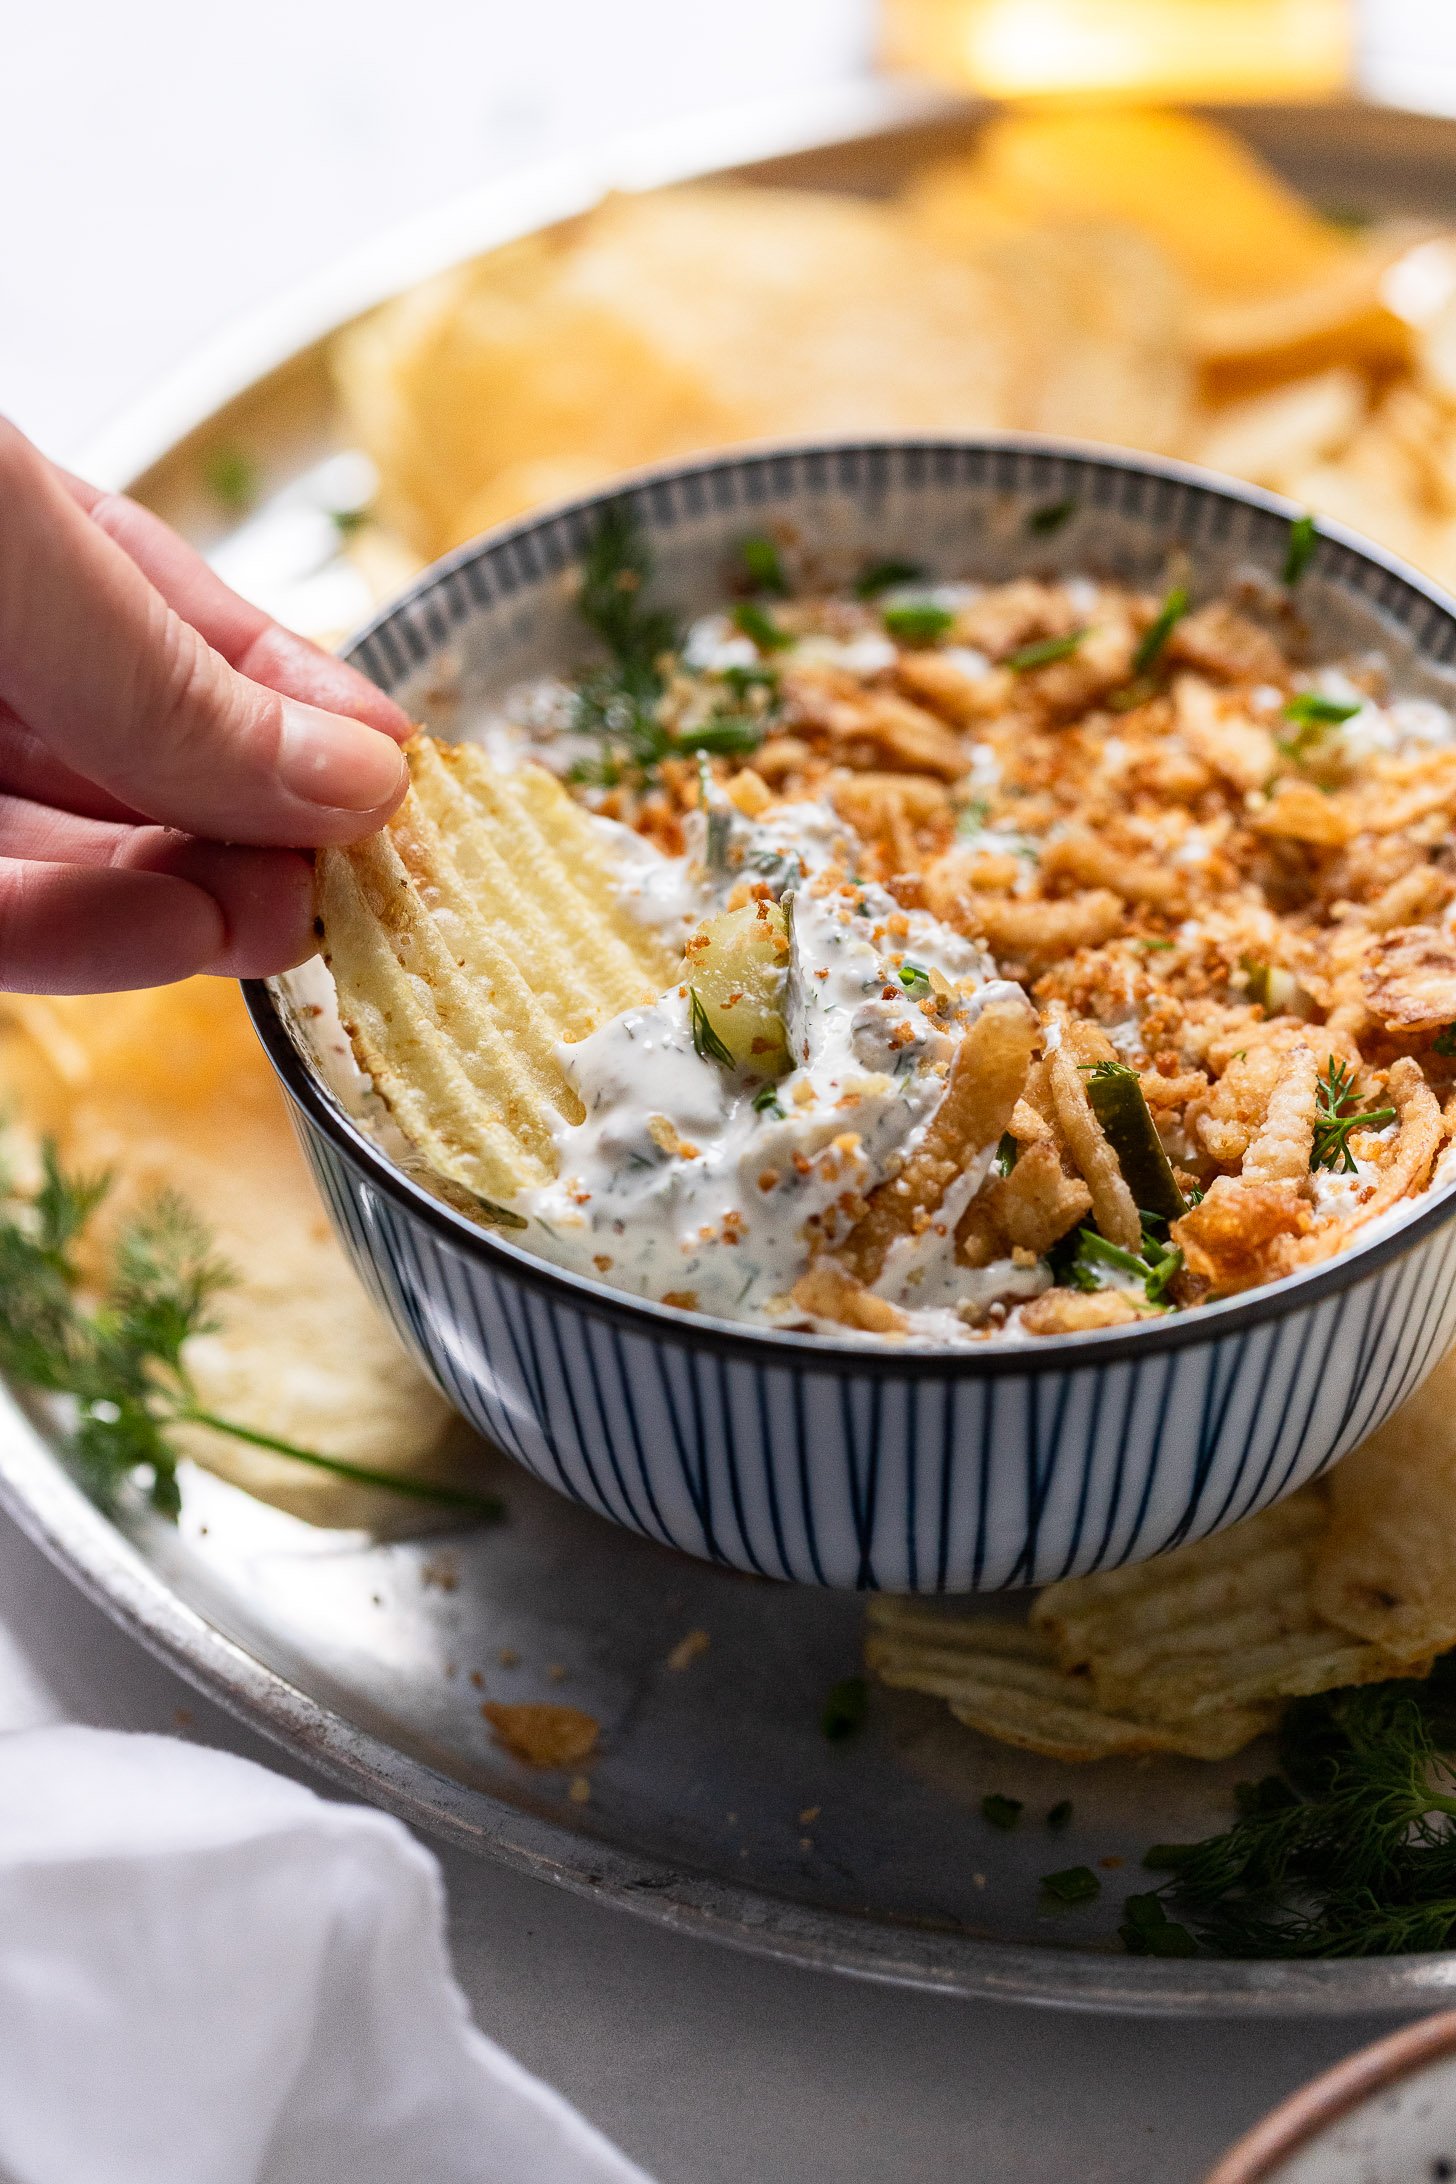 Chip dipping into pickle ranch dip with crispy onions.